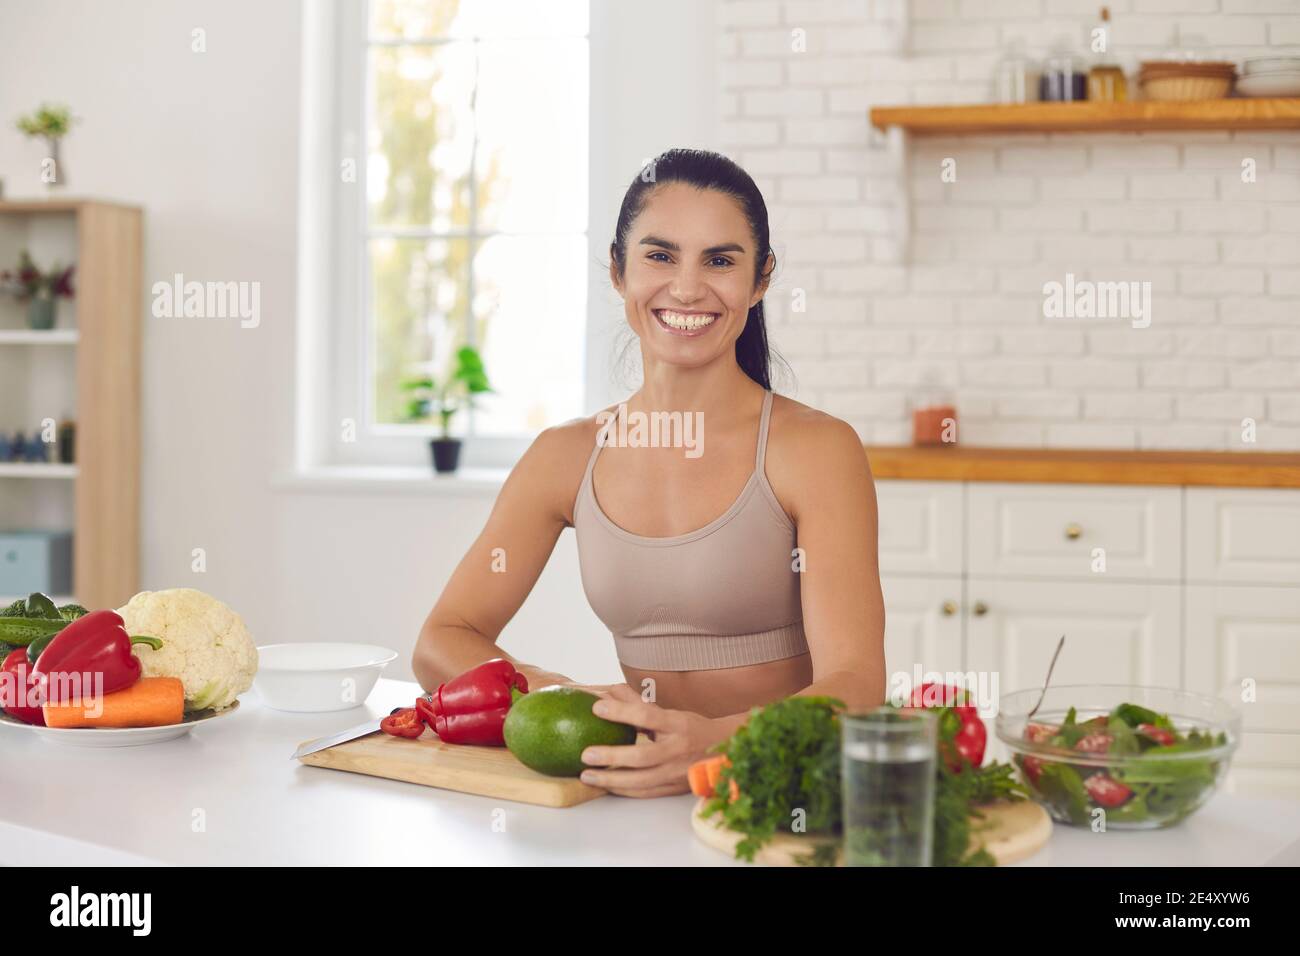 Happy cheerful sporty woman cooking a healthy vegetarian meal at the kitchen table Stock Photo